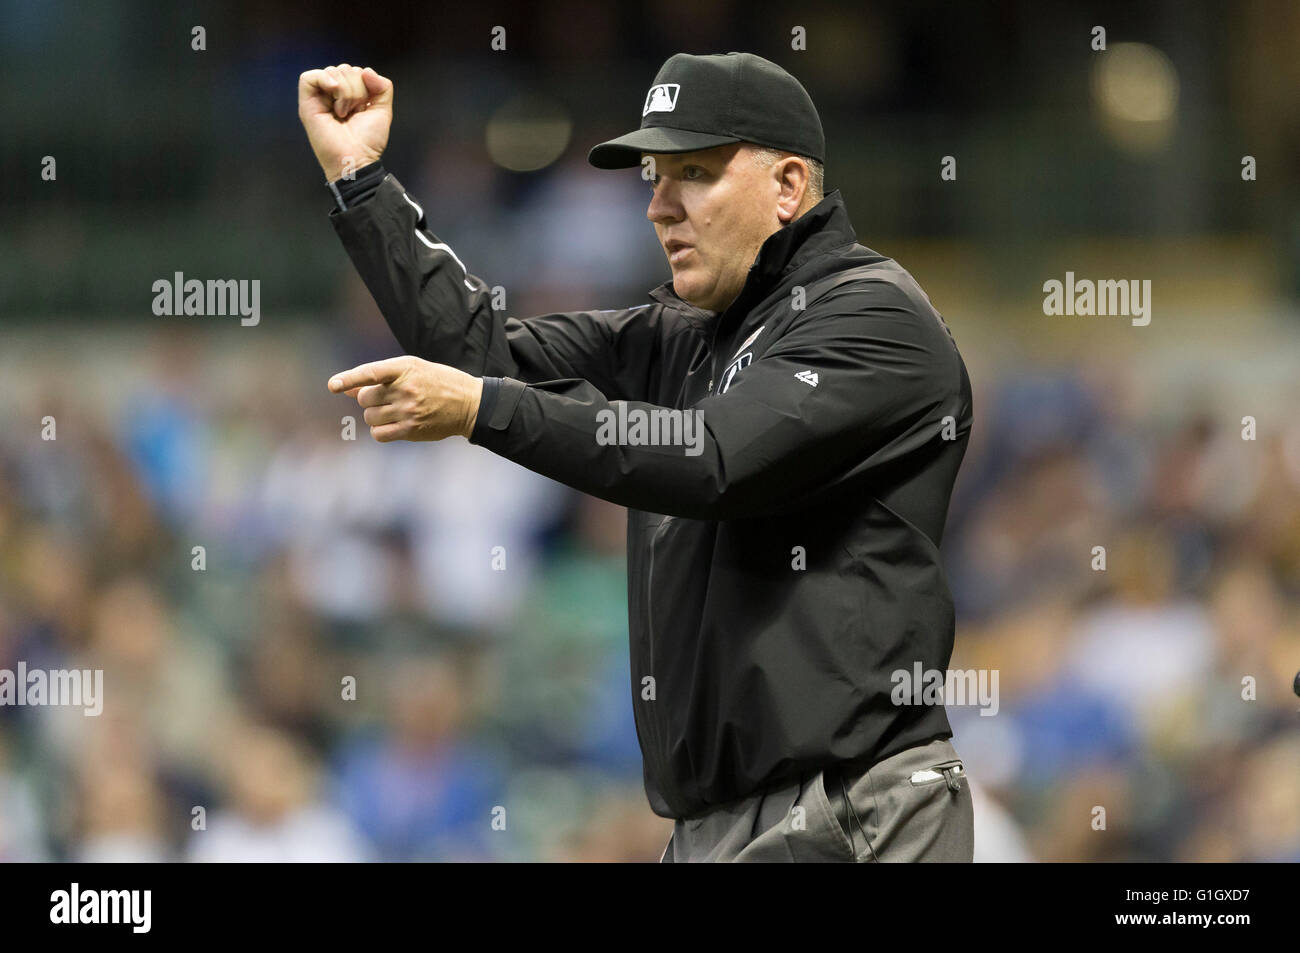 May 14, 2016: Umpire Jeff Nelson confirms the replay that the runner was out at third base during the Major League Baseball game between the Milwaukee Brewers and the San Diego Padres at Miller Park in Milwaukee, WI. John Fisher/CSM Stock Photo